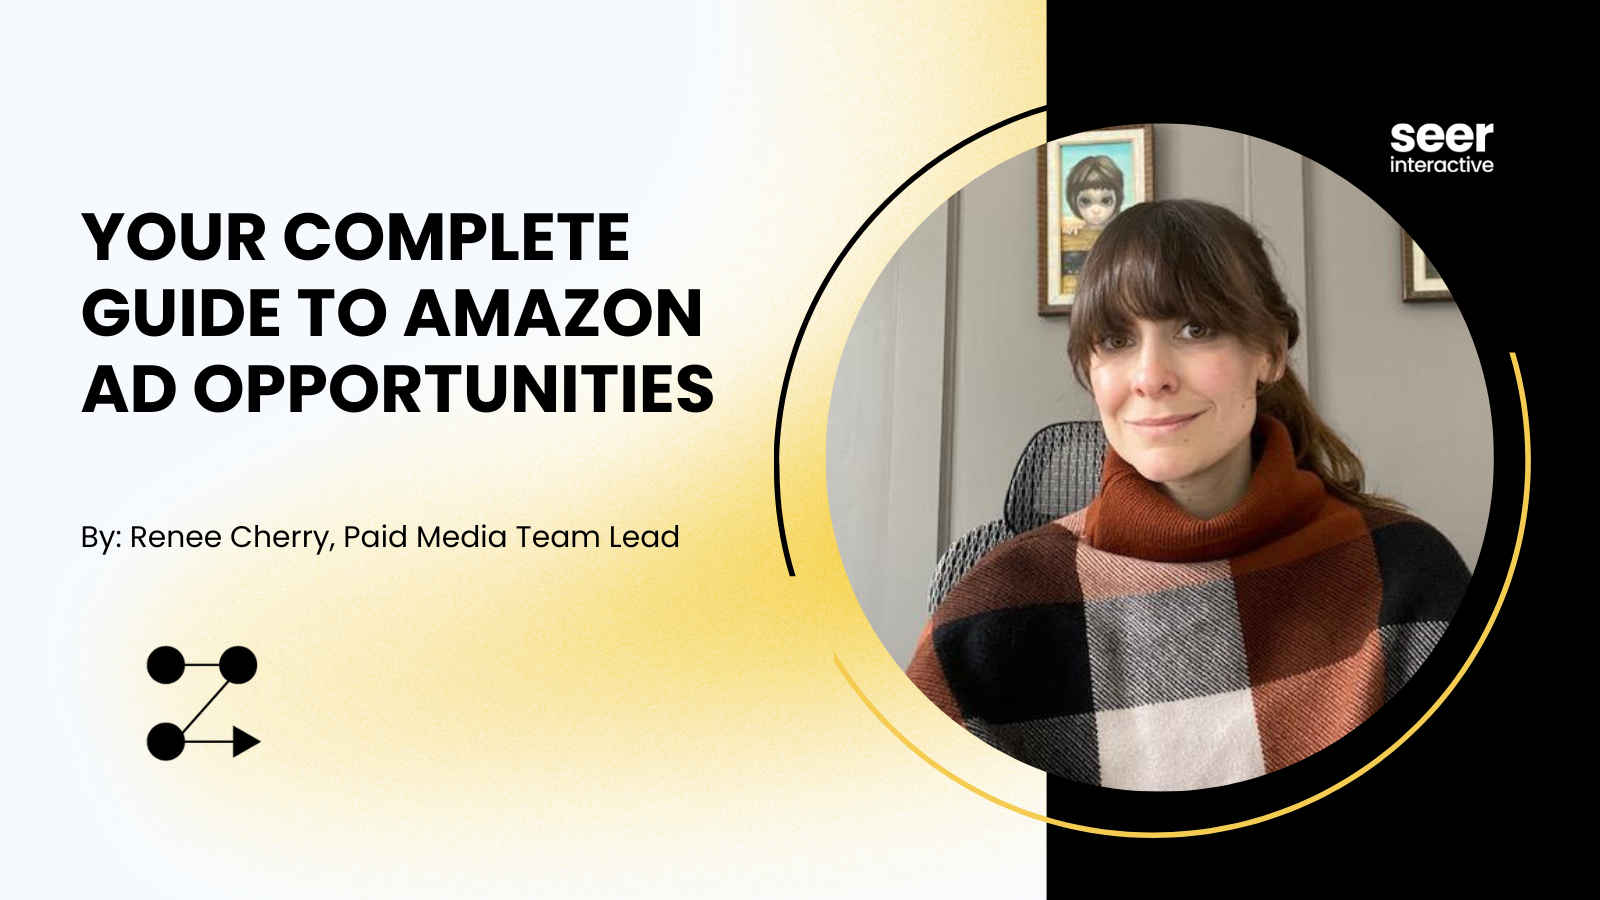 Your Complete Guide to Amazon Ad Opportunities